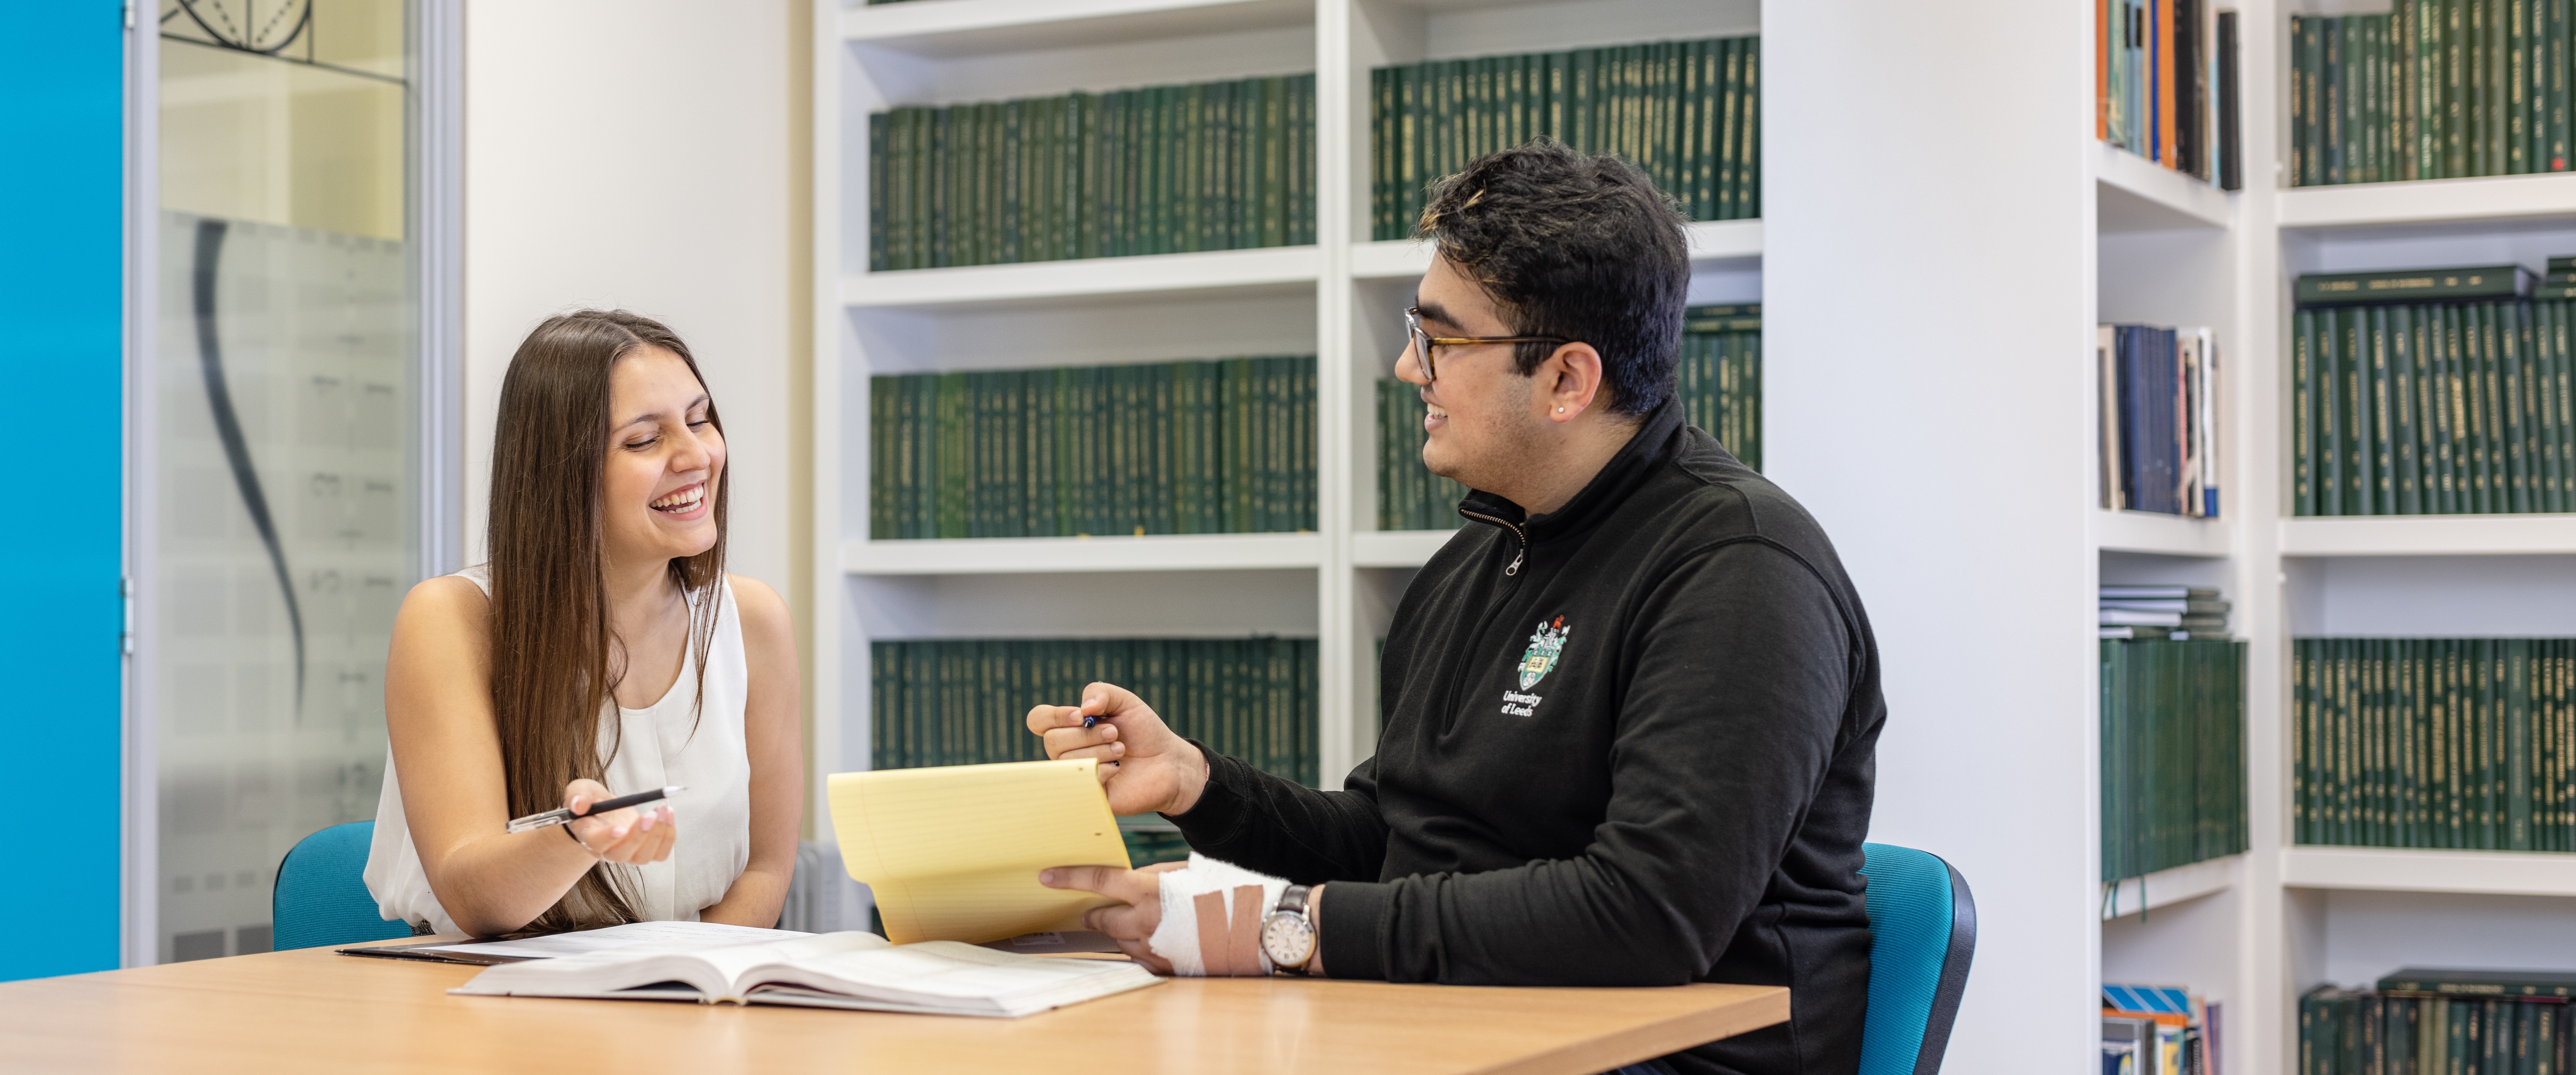 Two students discussing an assignment in the maths reading room